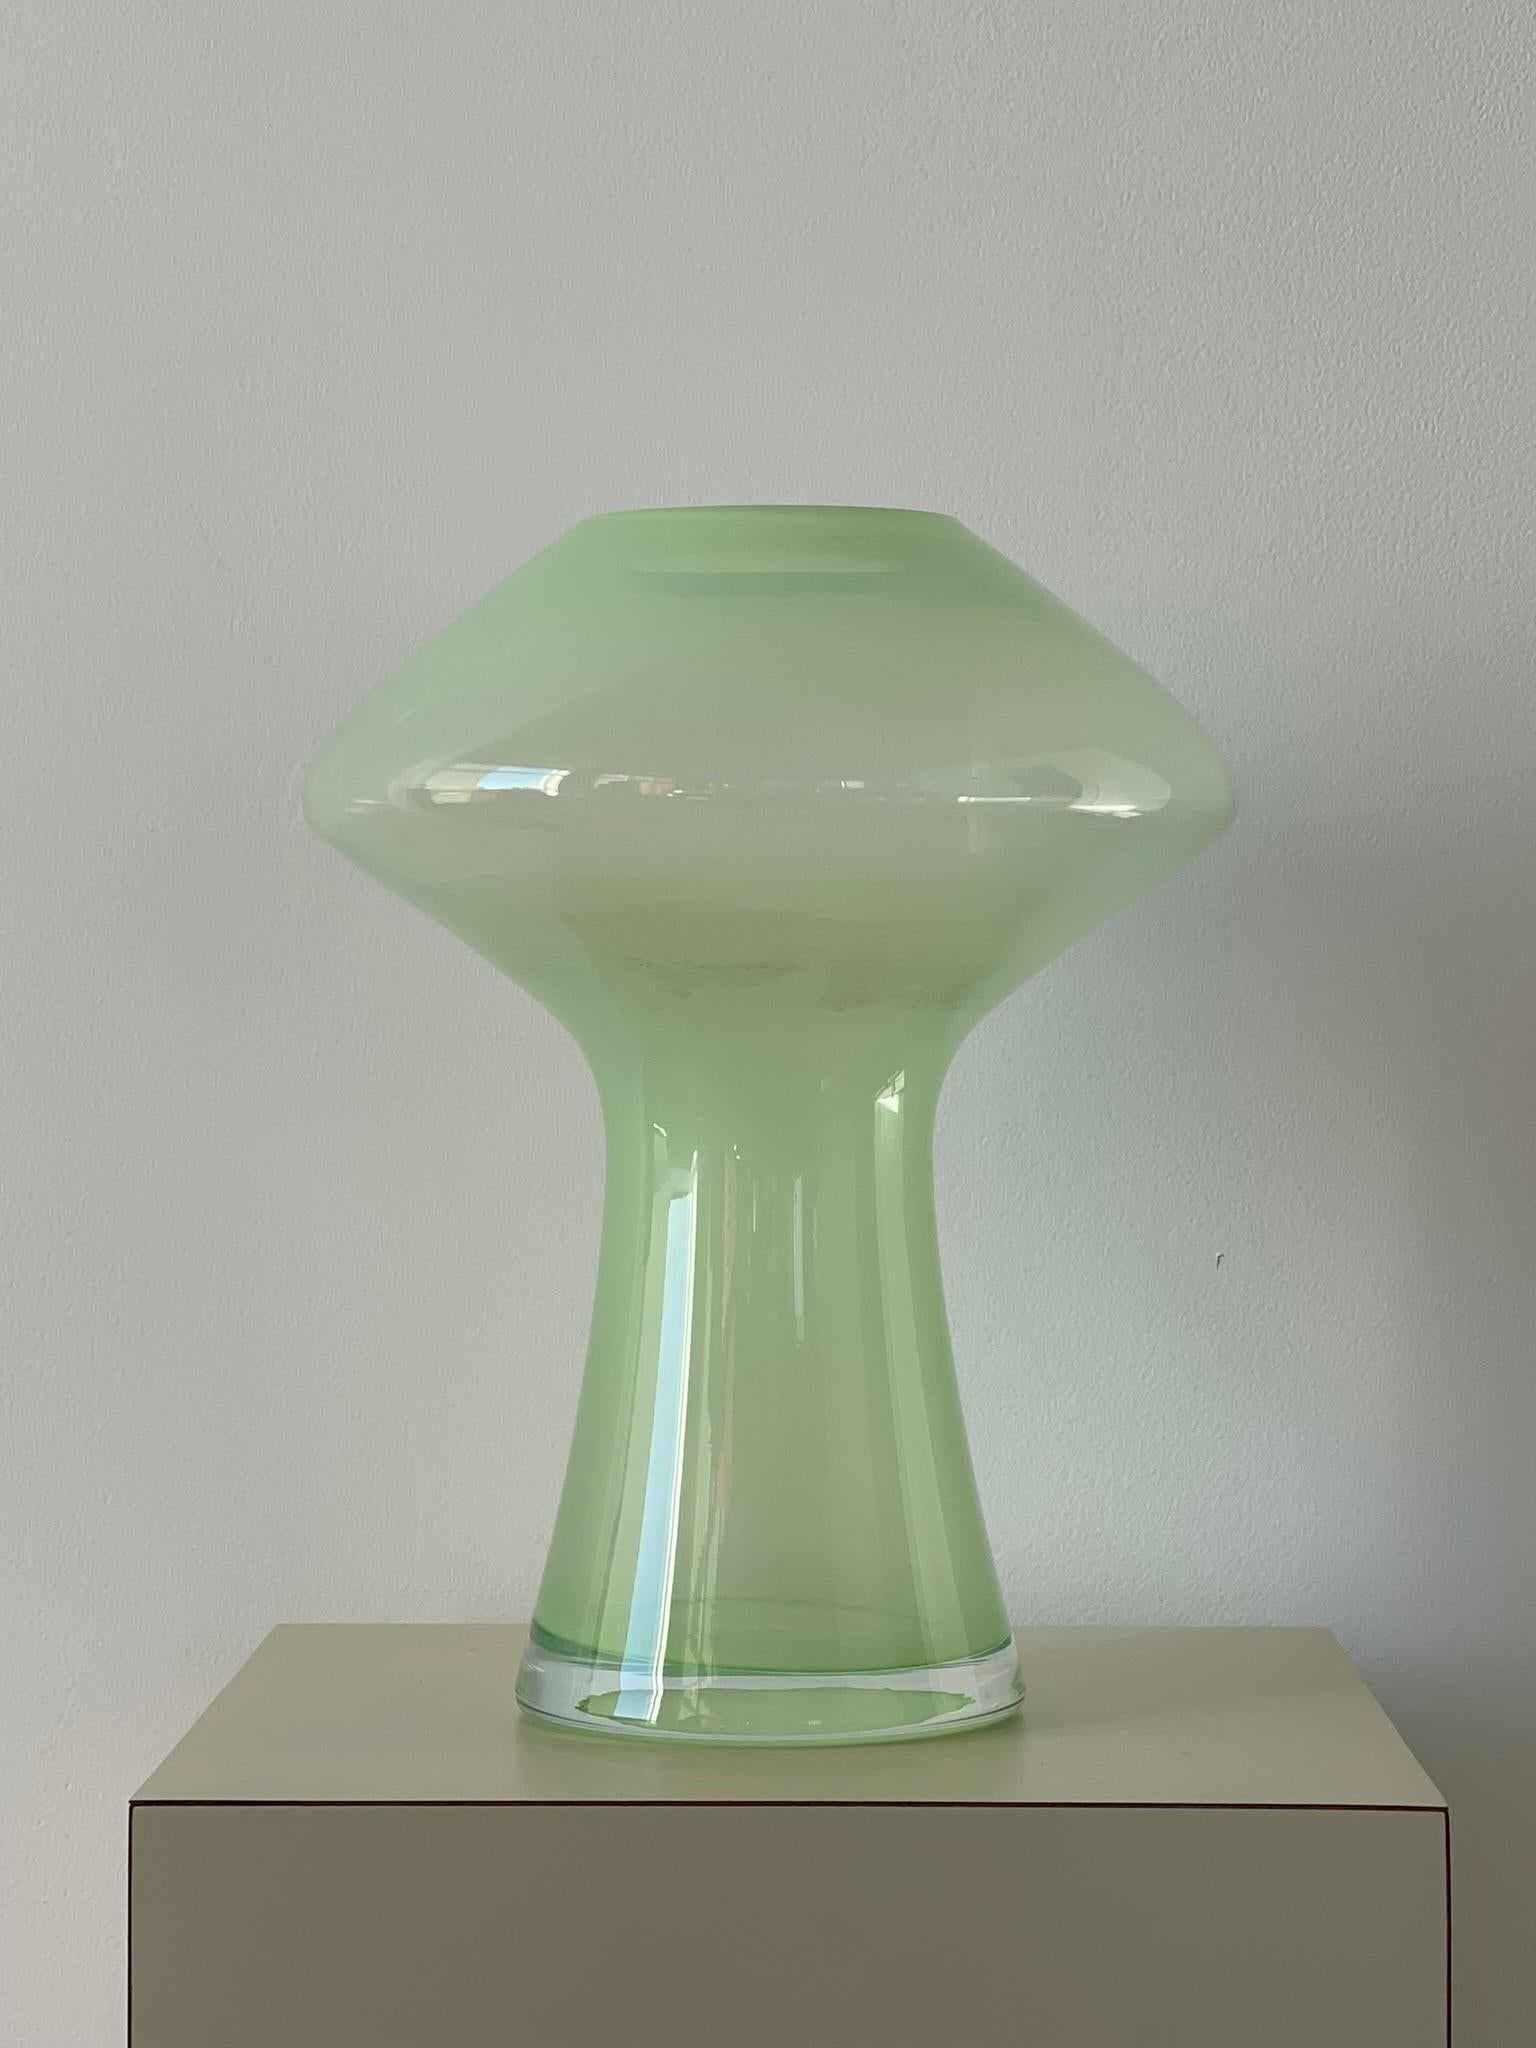 20th Century Space Age Blown glass vase. Expertly blown green glass made in Italy. Unique space age shape and beautiful lime green transparent glass.